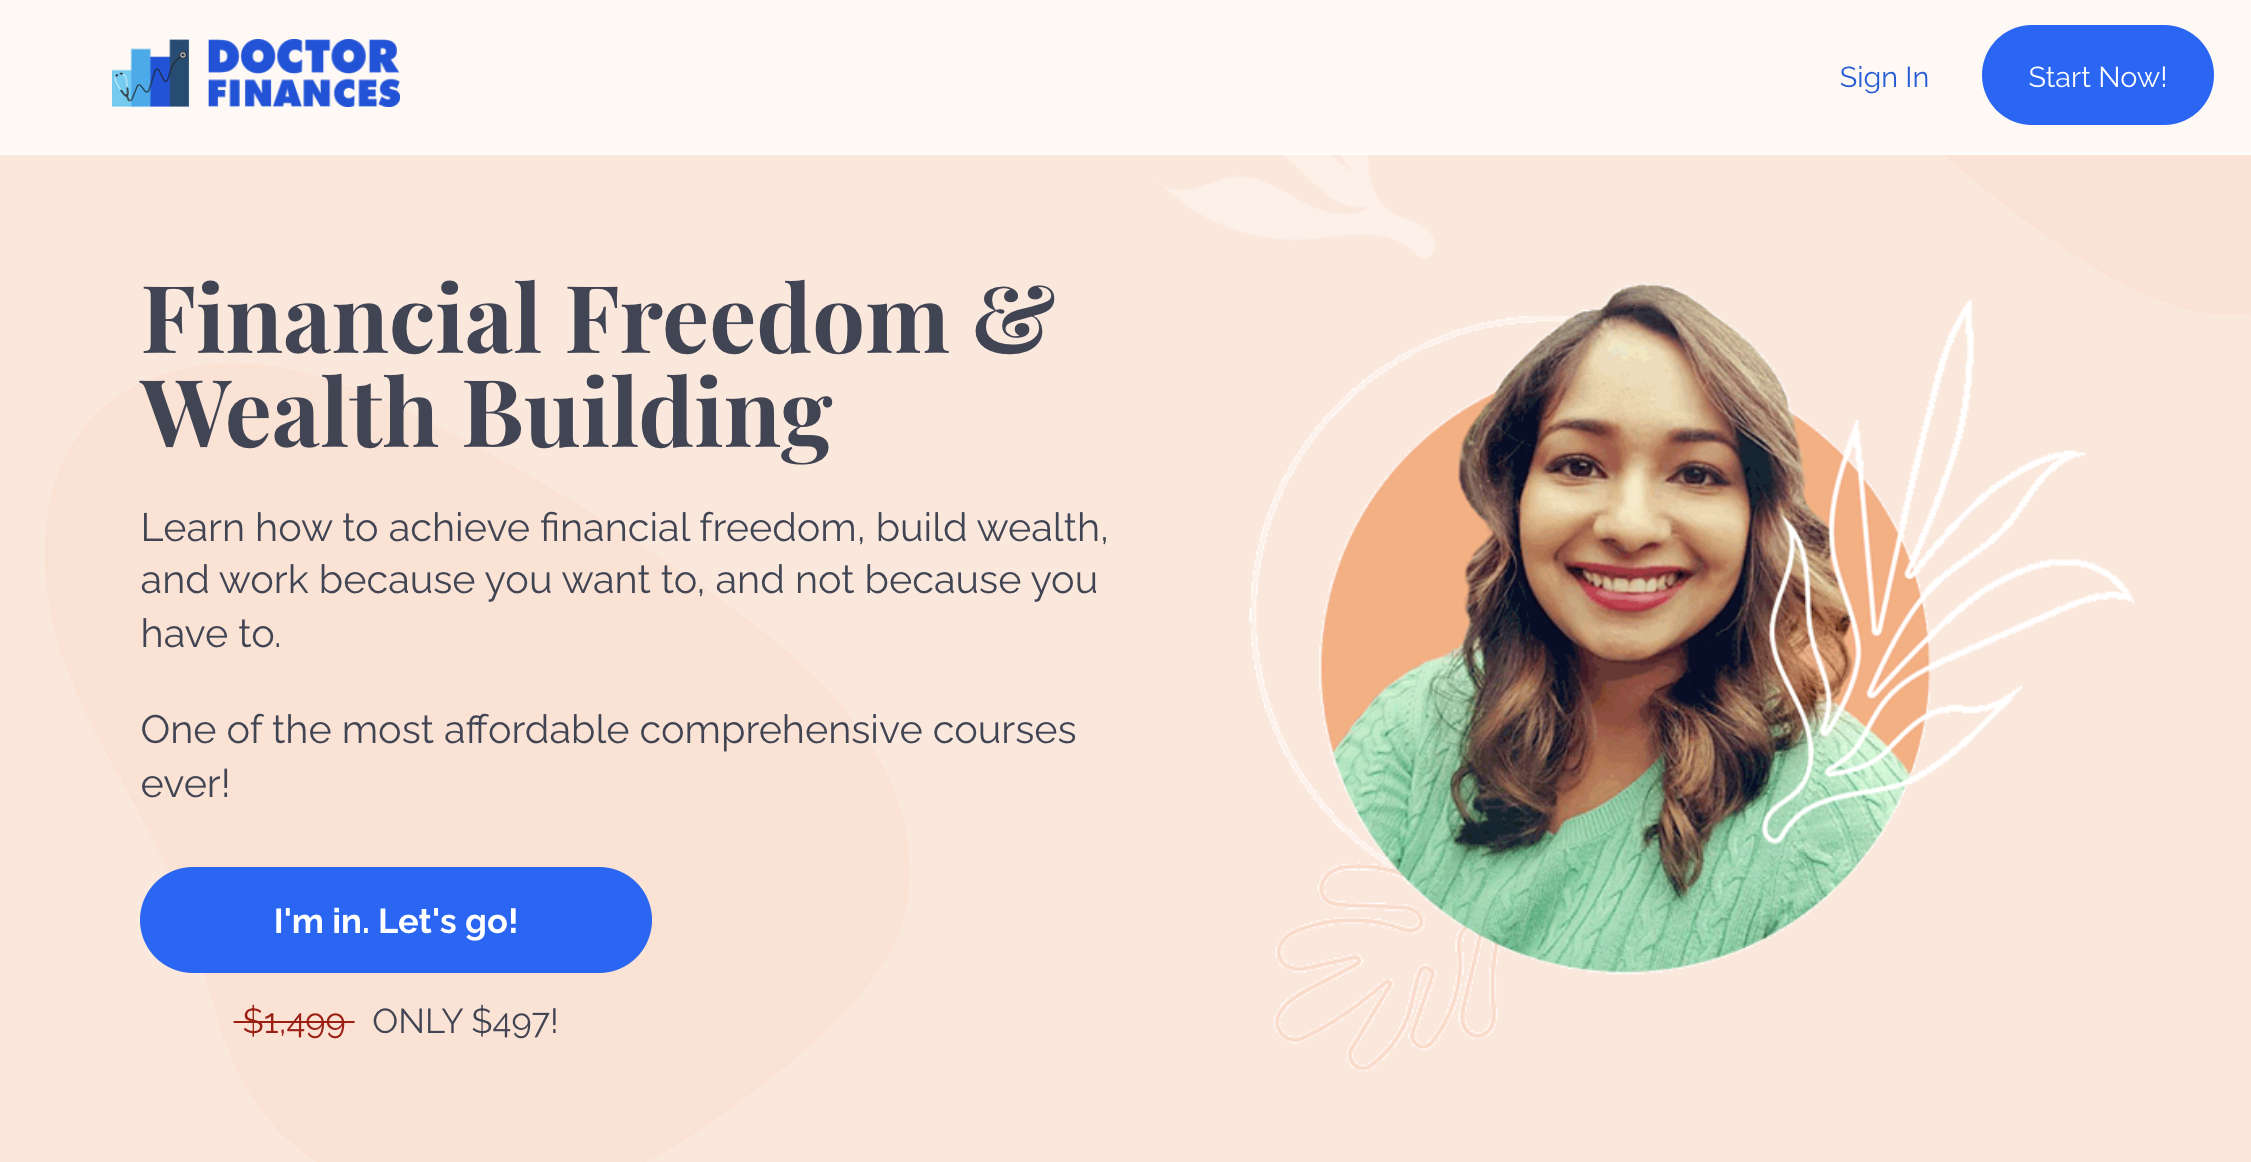 **The Life Changing Financial Freedom and Wealth Building Course!**